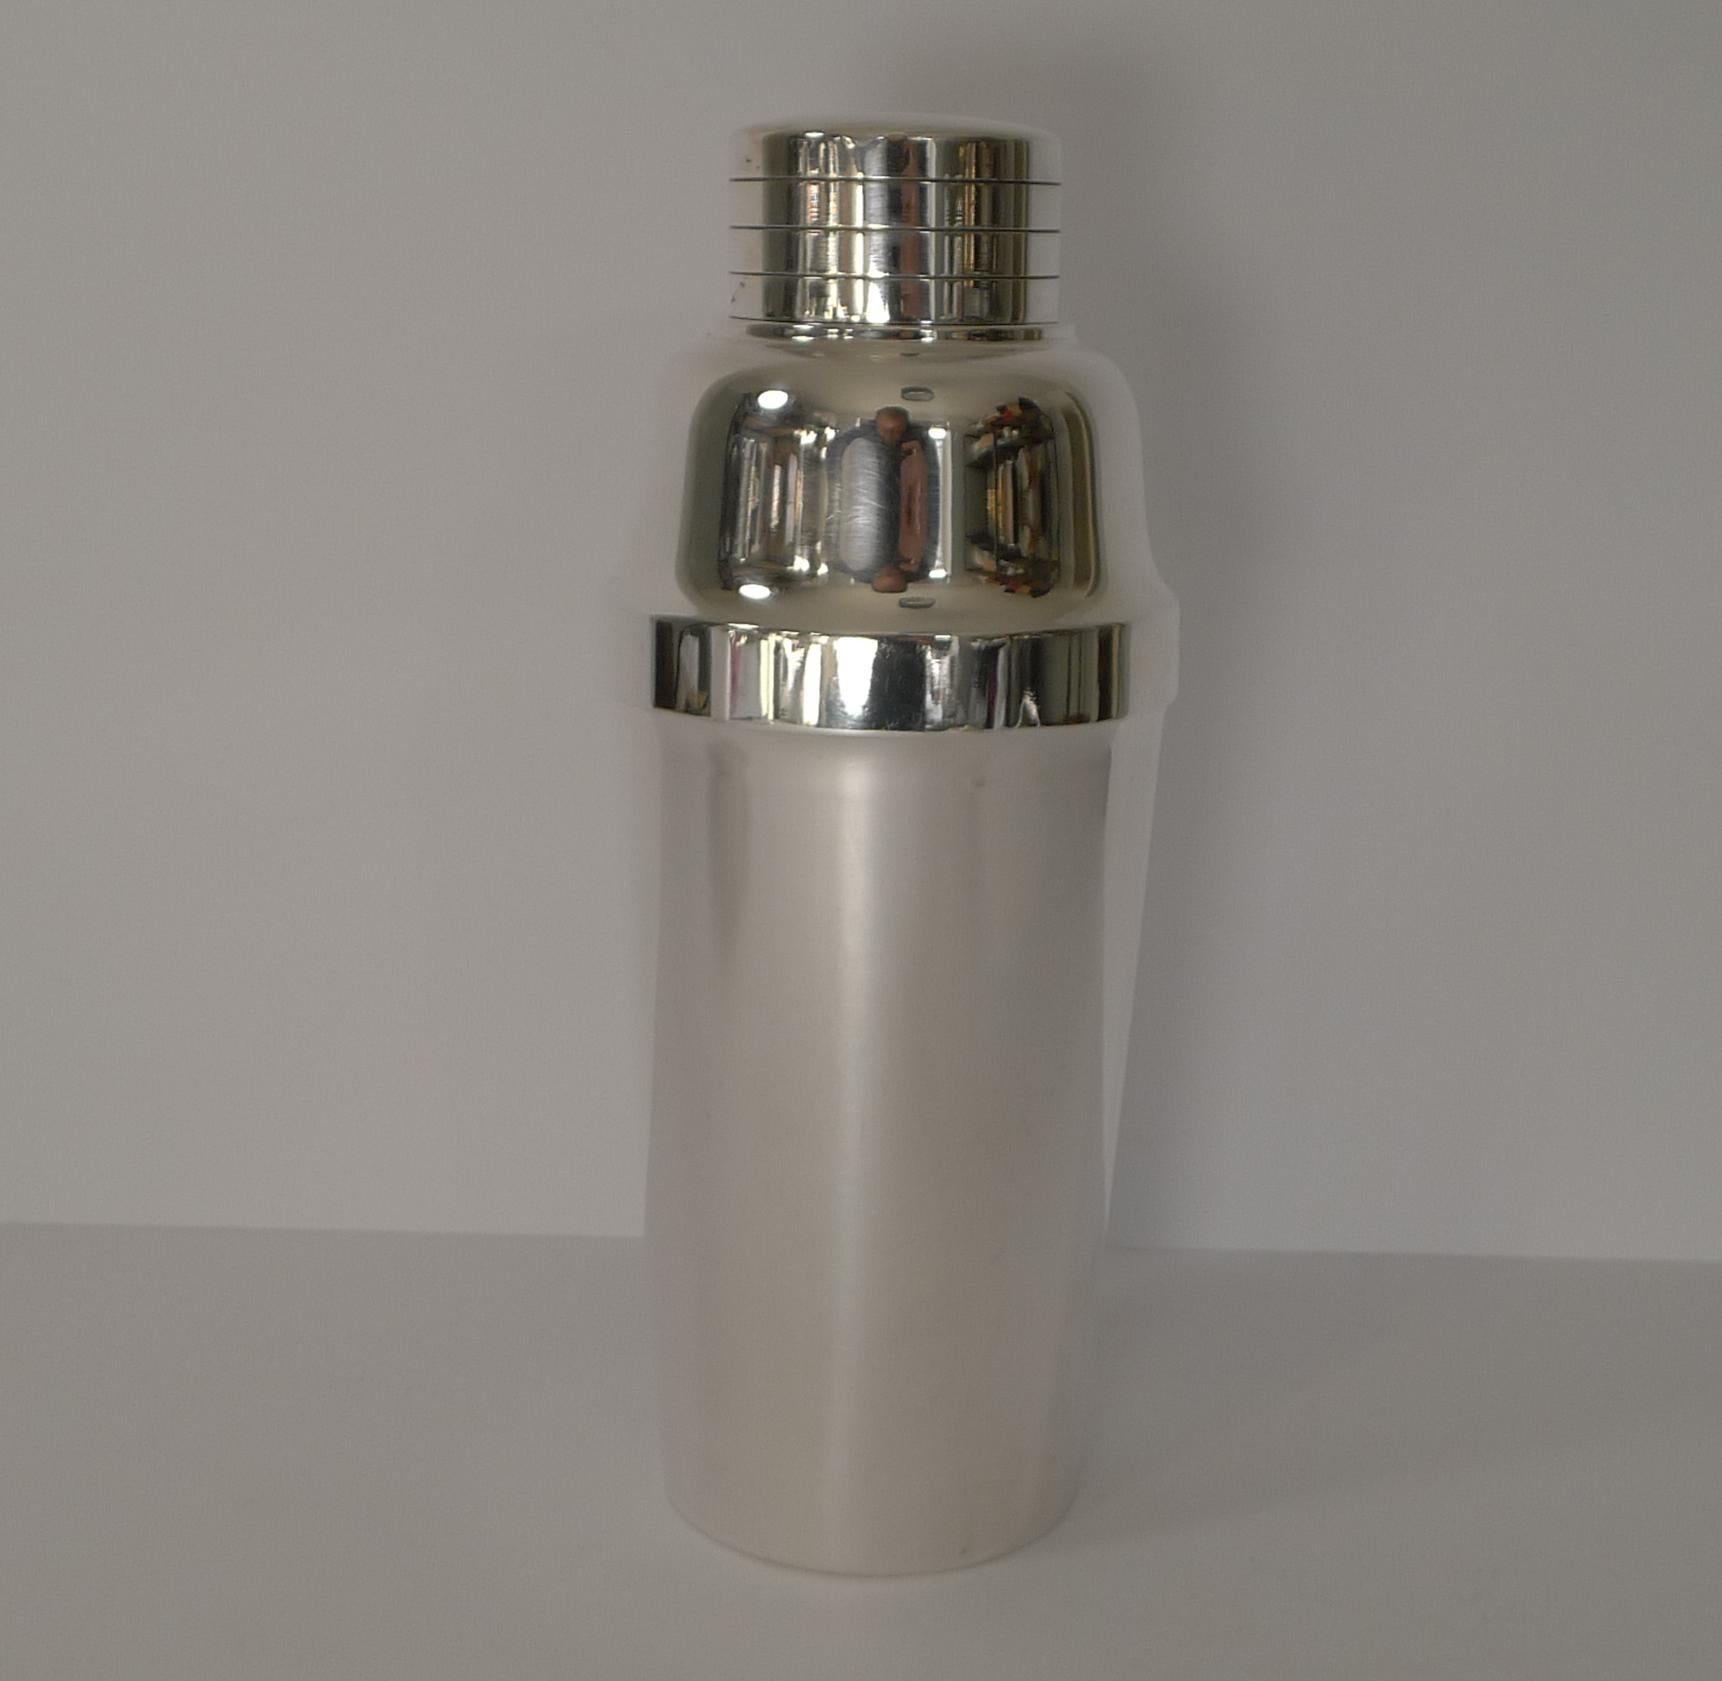 A superb French cocktail shaker just back from our silversmith's workshop having been professionally cleaned and polished returning it to it's former glory dating to circa 1935.

Christofle is a goldsmith and tableware company, founded in Paris in